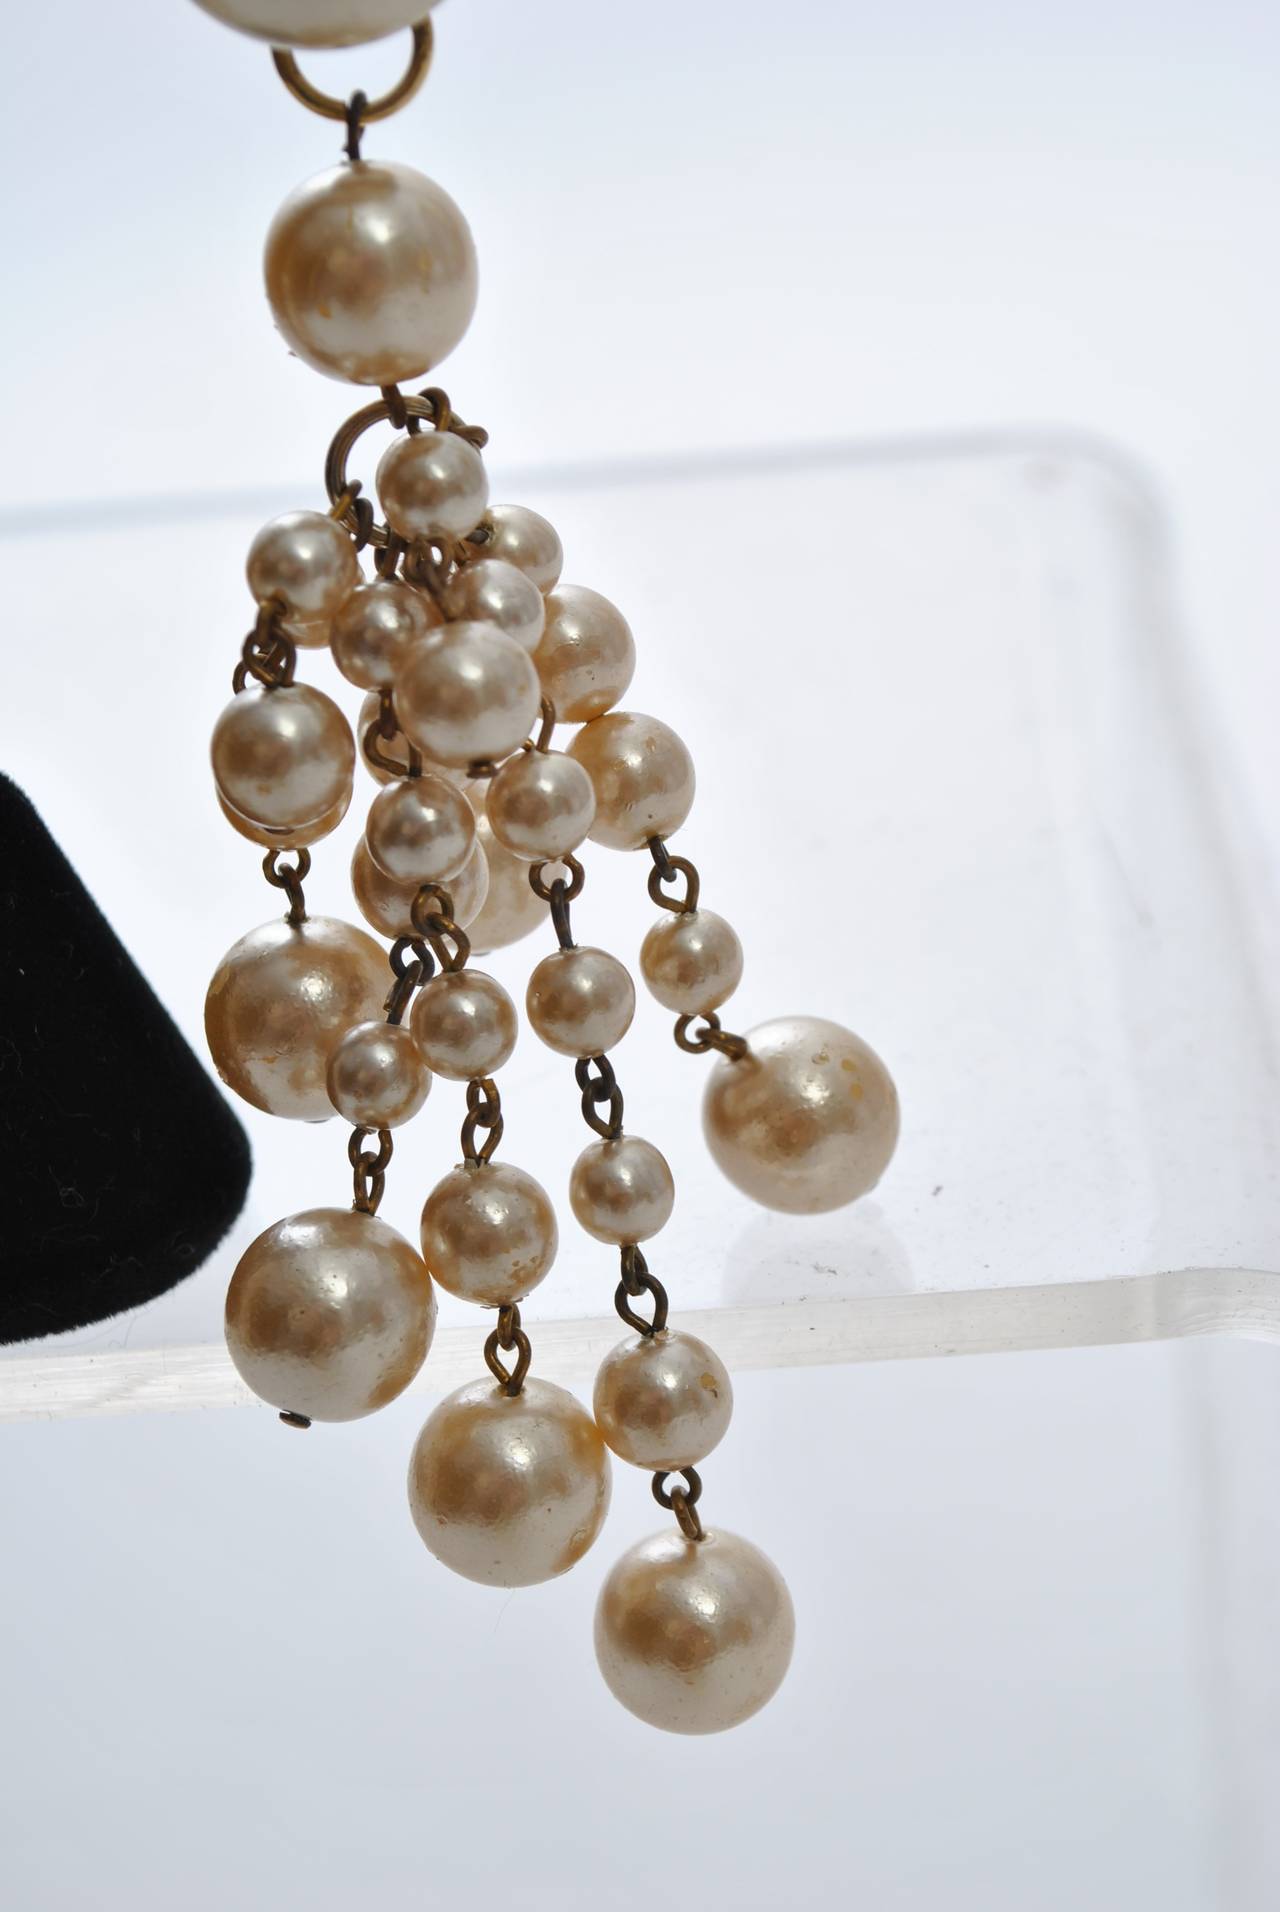 Pearl chandelier earrings suspended from a mabe pearl earpiece.